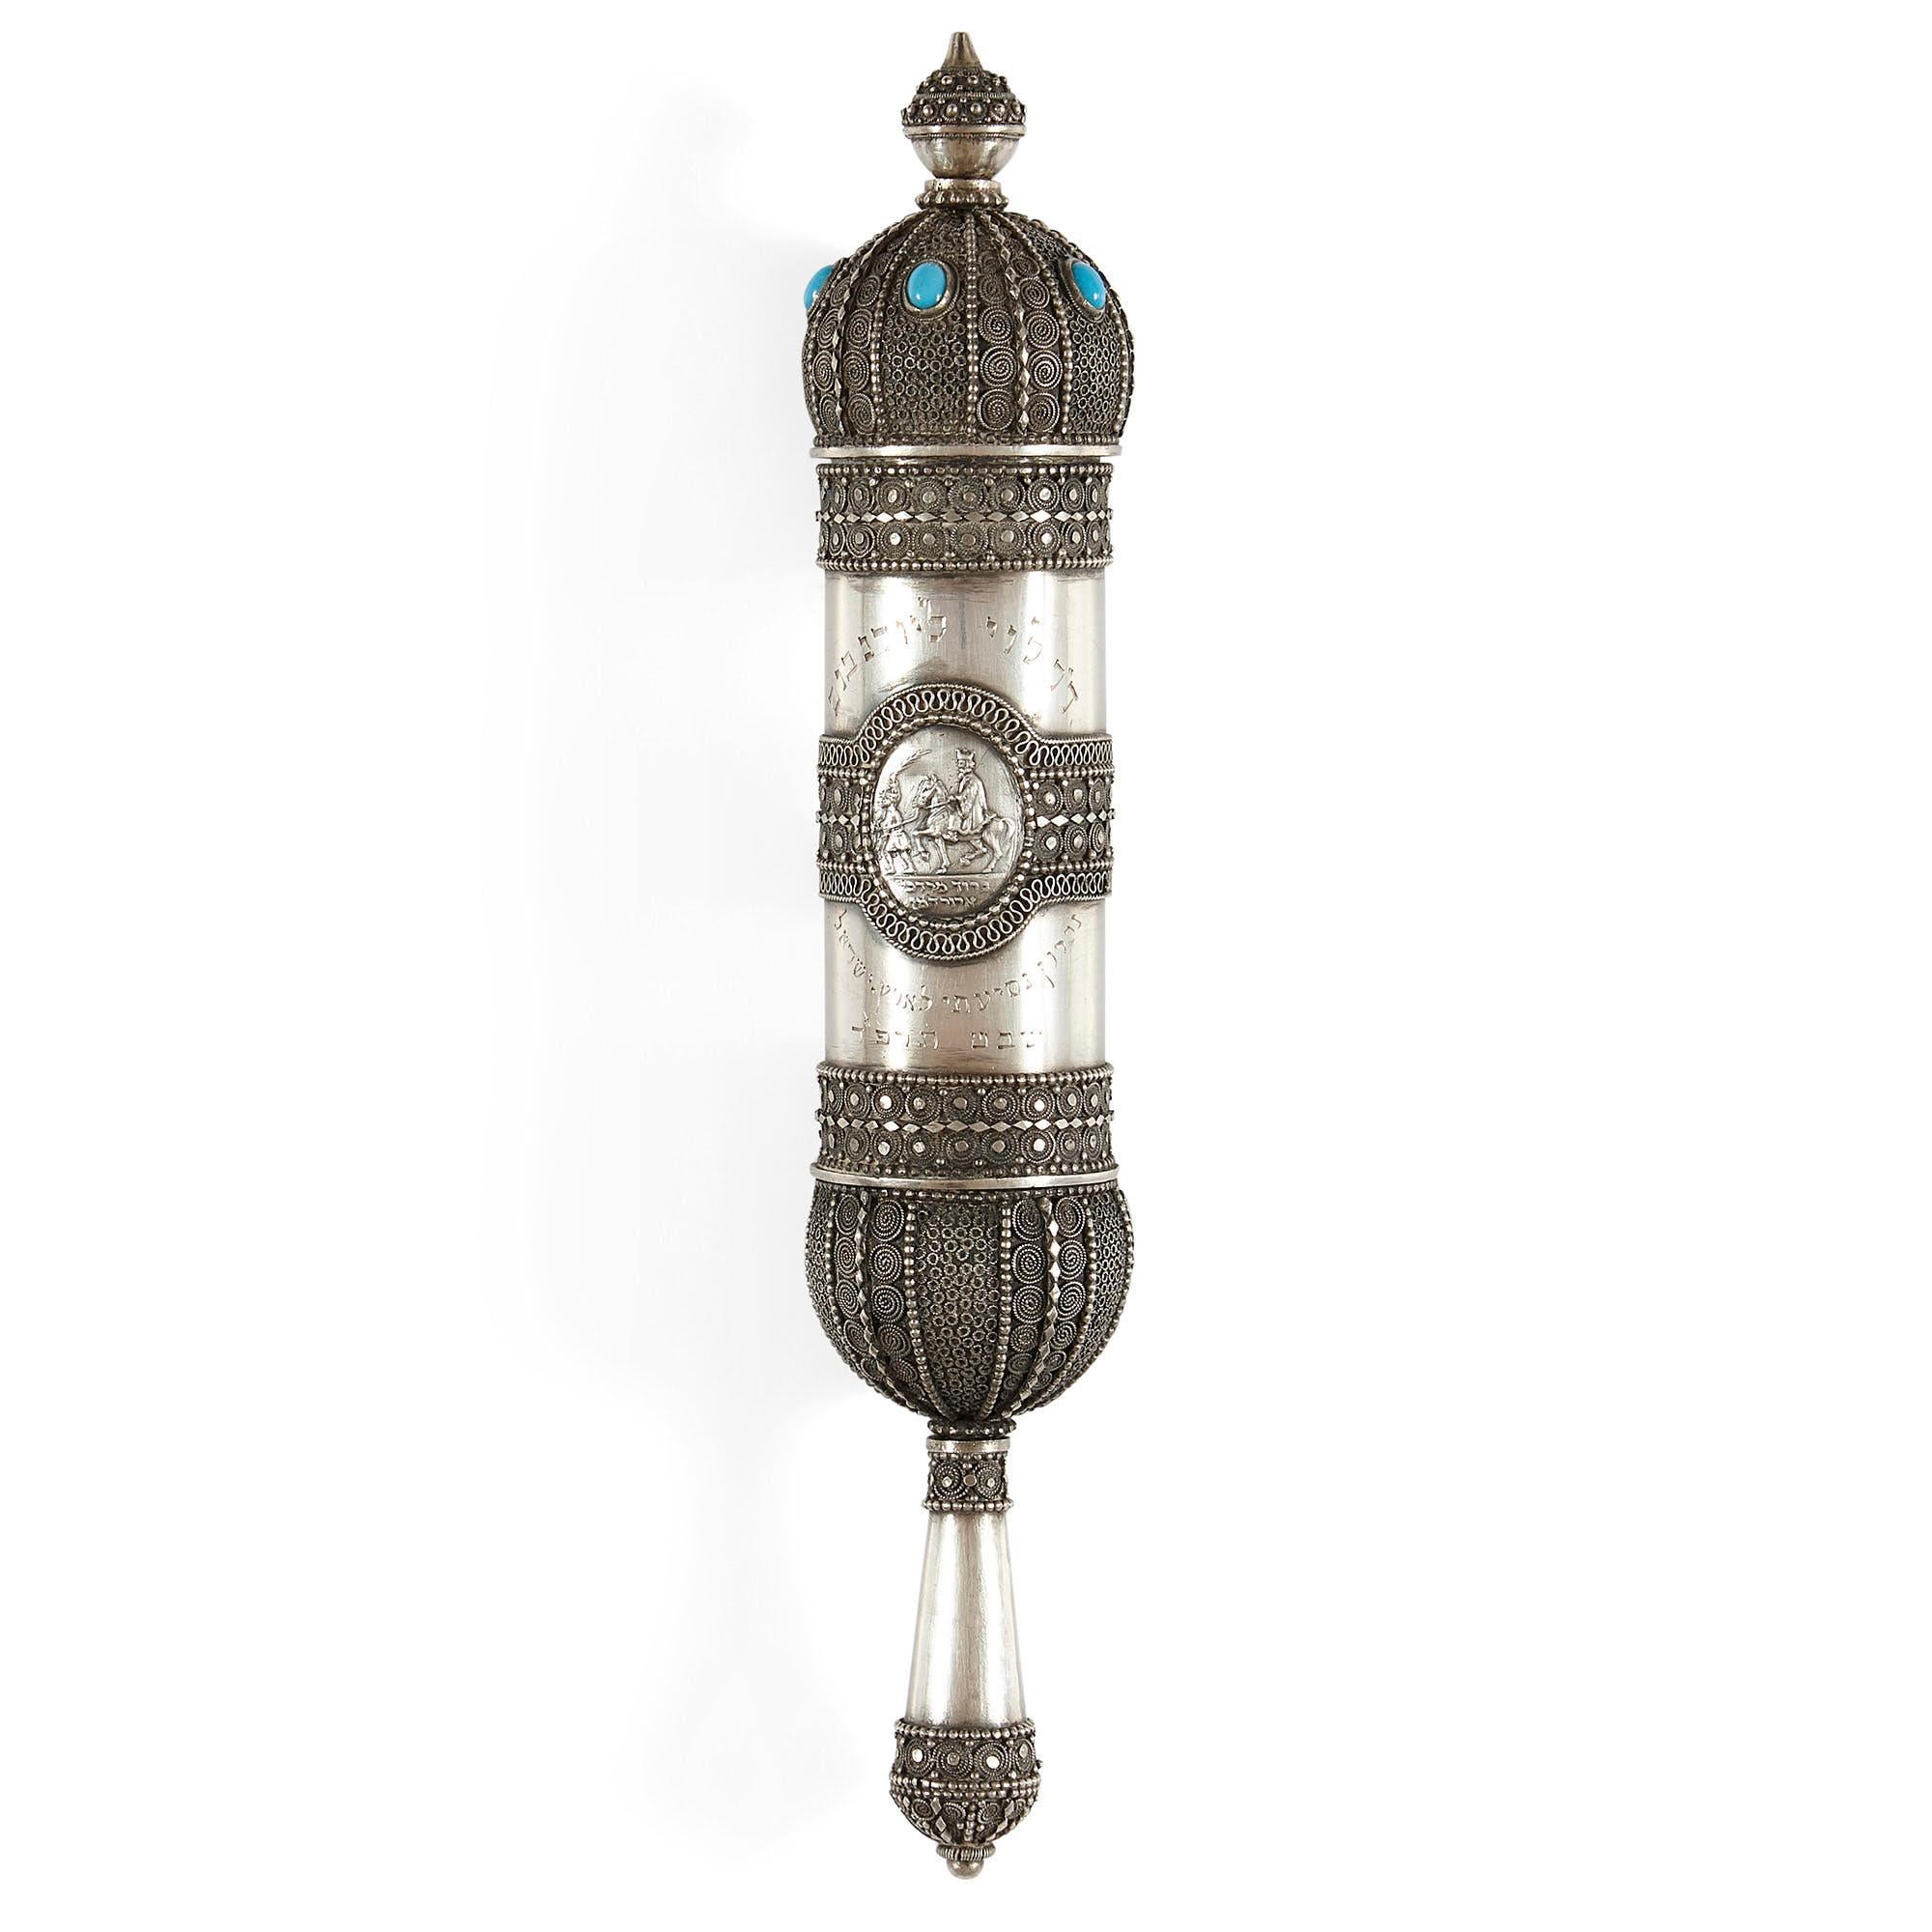 Silver Megillah with filigree work by Bezalel Academy
Jerusalem, c. 1920
Measures: Height 22cm, diameter 4cm

This beautiful silver megillah was crafted in the early 20th century by the prestigious Bezalel Academy of Arts and Design in